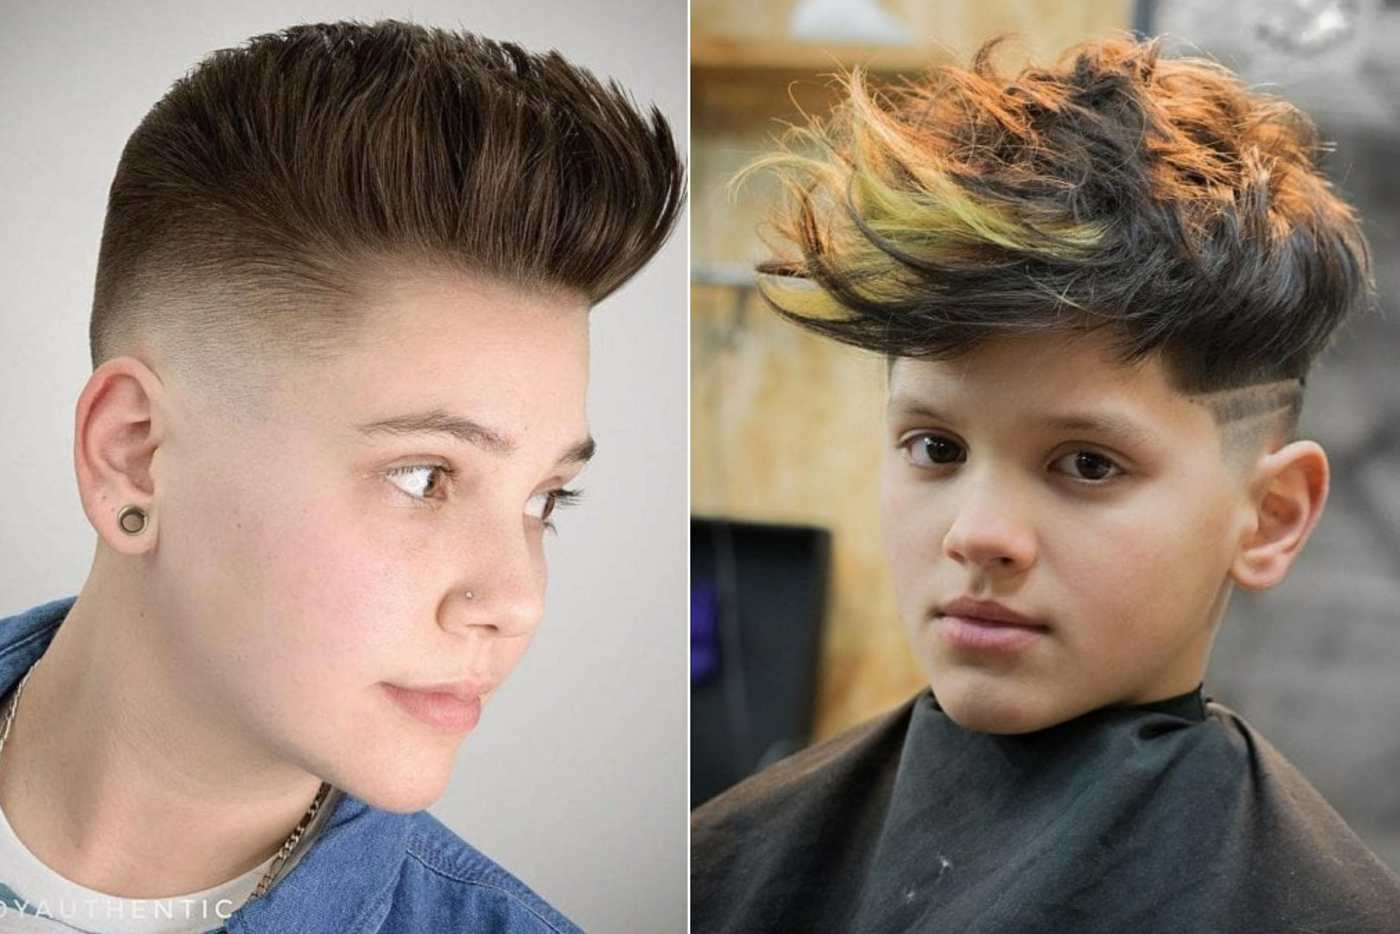 Peppy hairstyles for boys from 12 with Pompadour